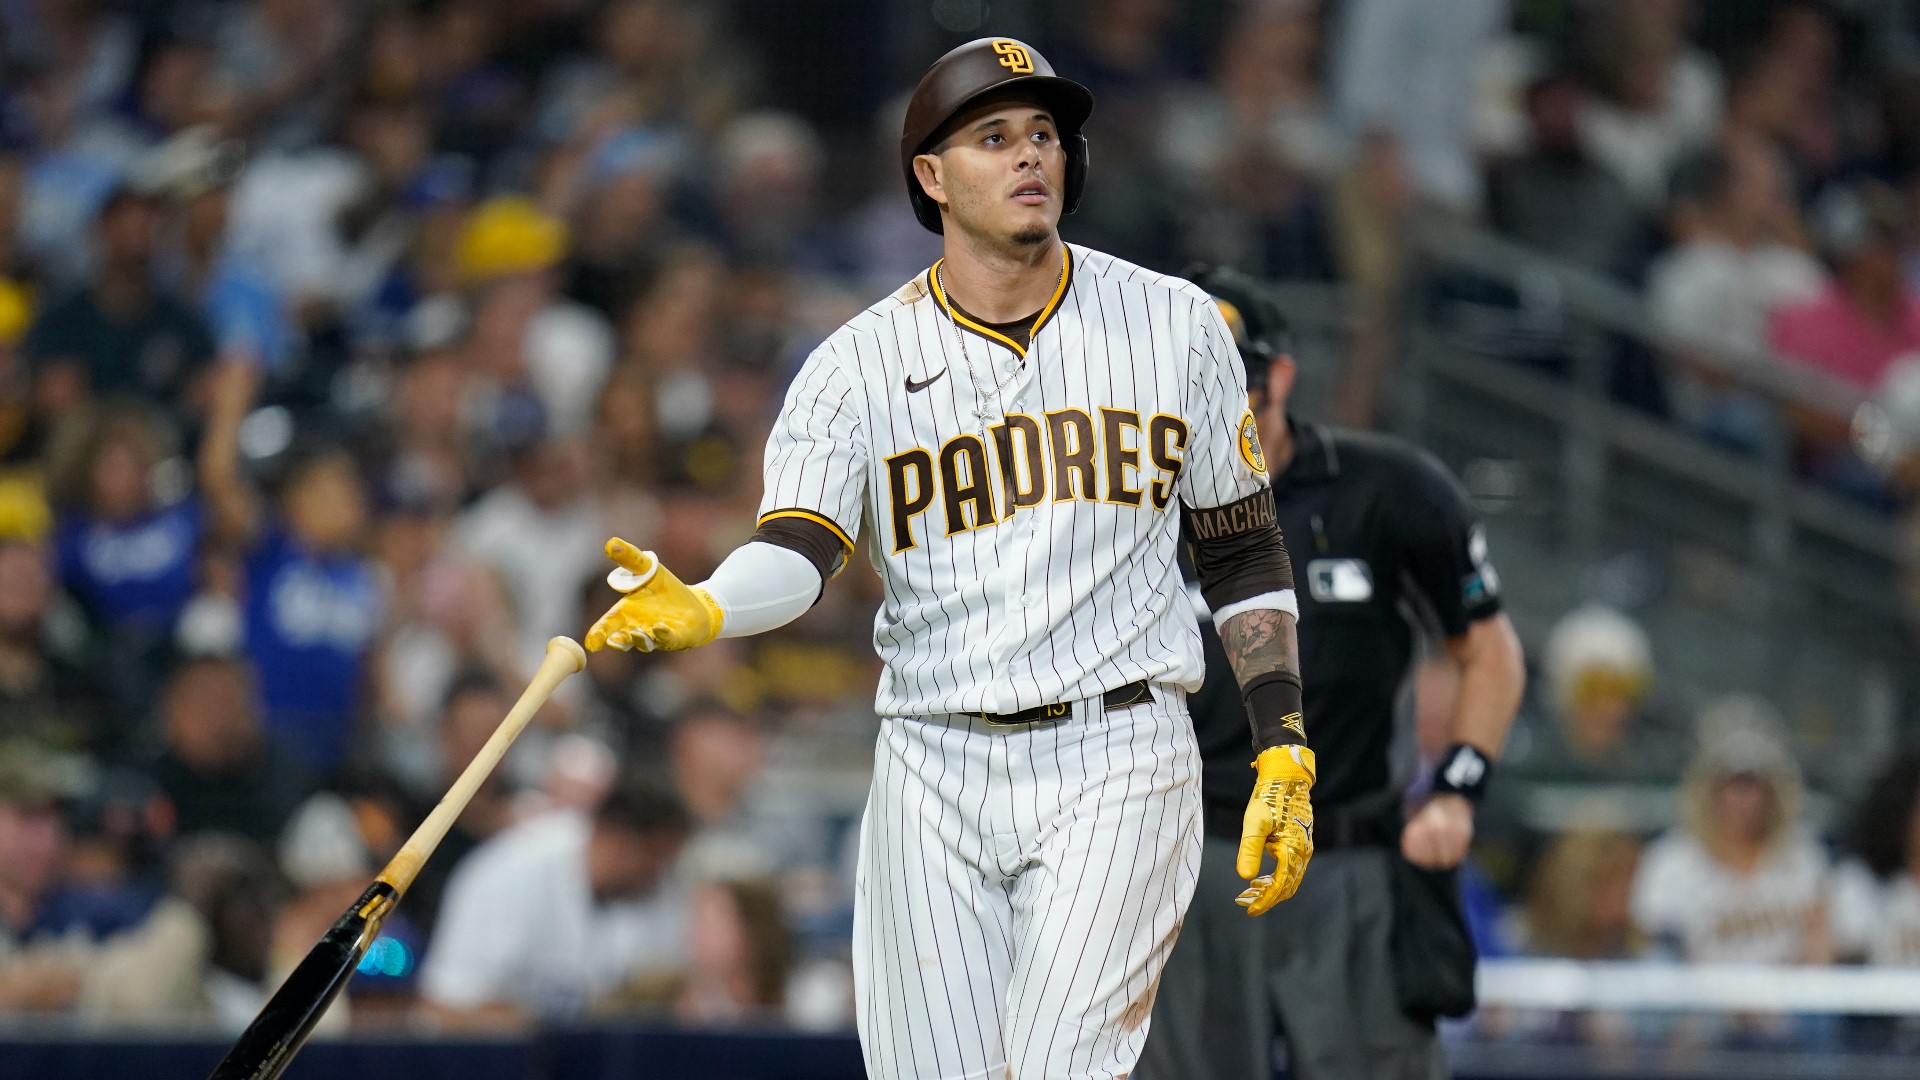 The Padres gave up only one run, but couldn't muster anything offensively during Wednesday nights game.